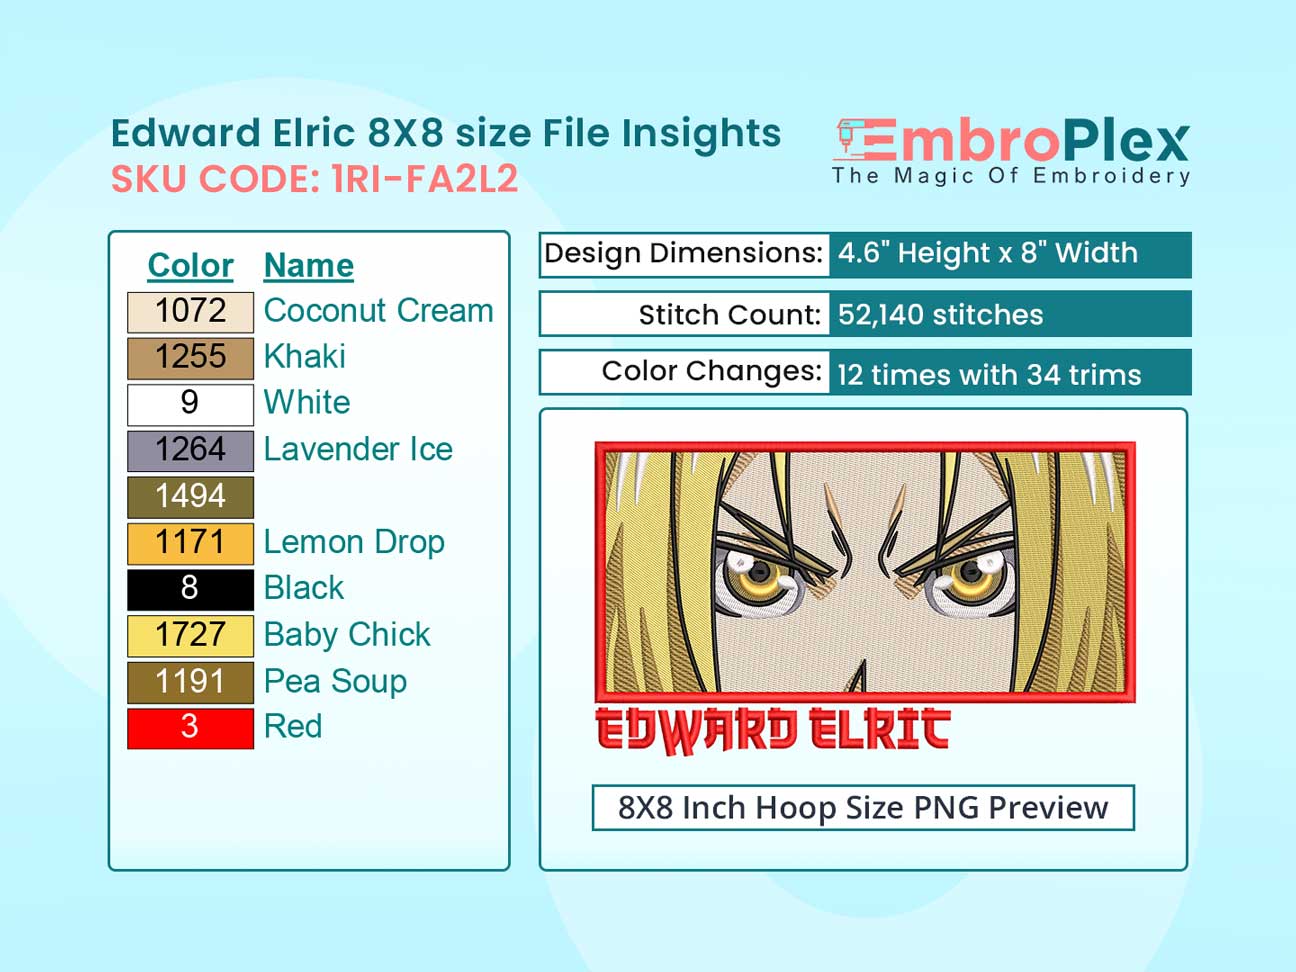 Anime-Inspired Edward Elric Embroidery Design File - 8x8 Inch hoop Size Variation overview image